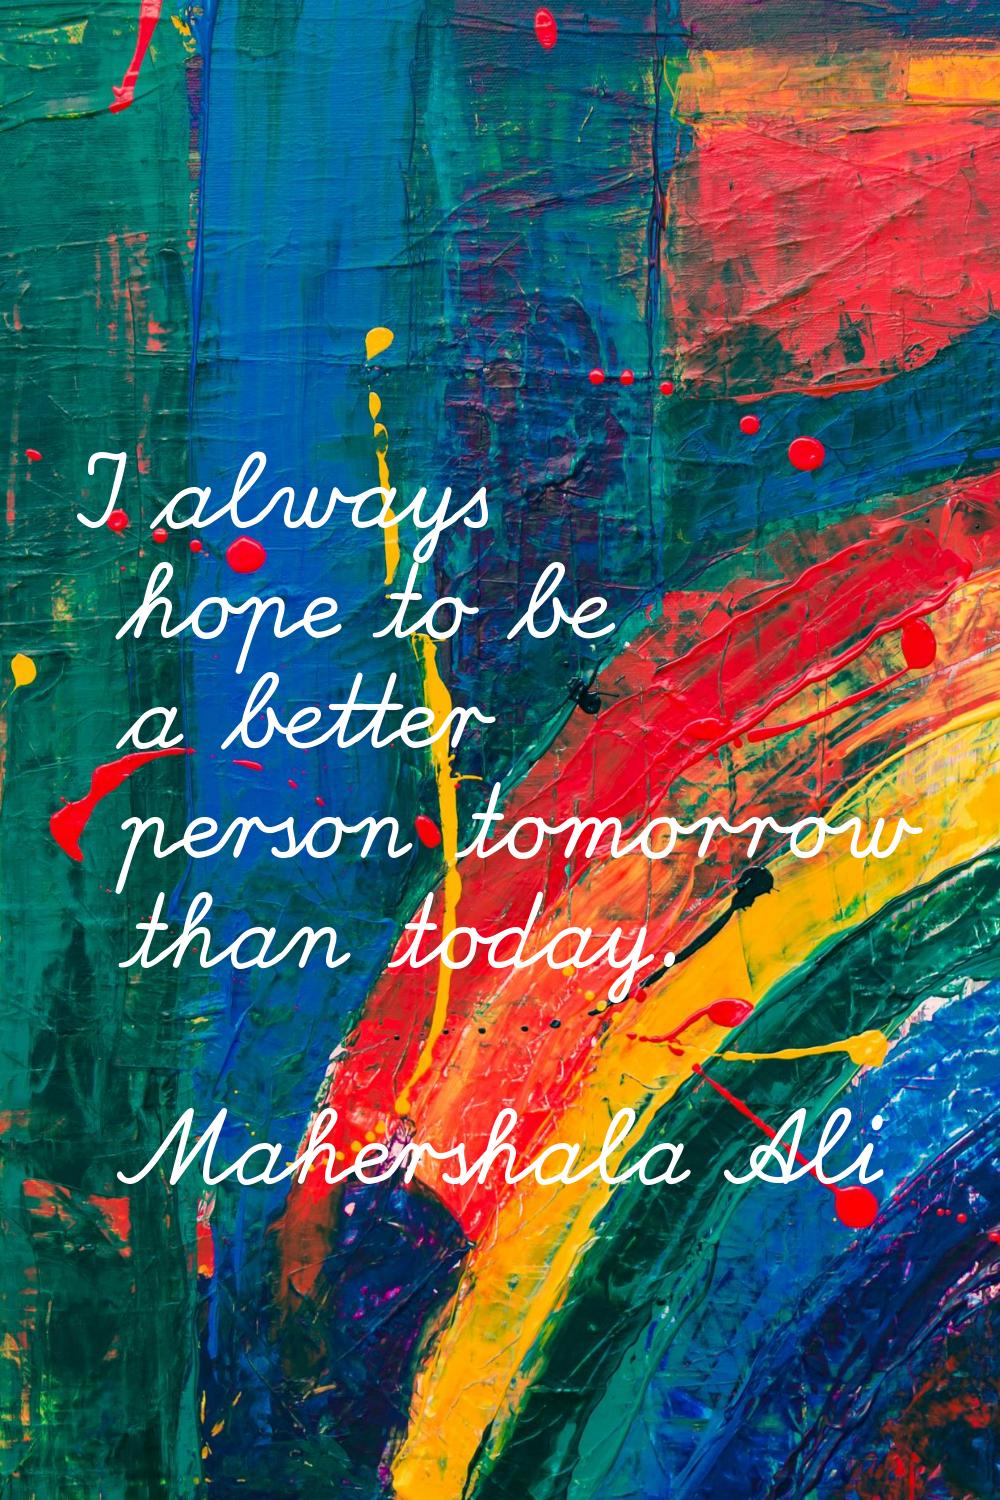 I always hope to be a better person tomorrow than today.